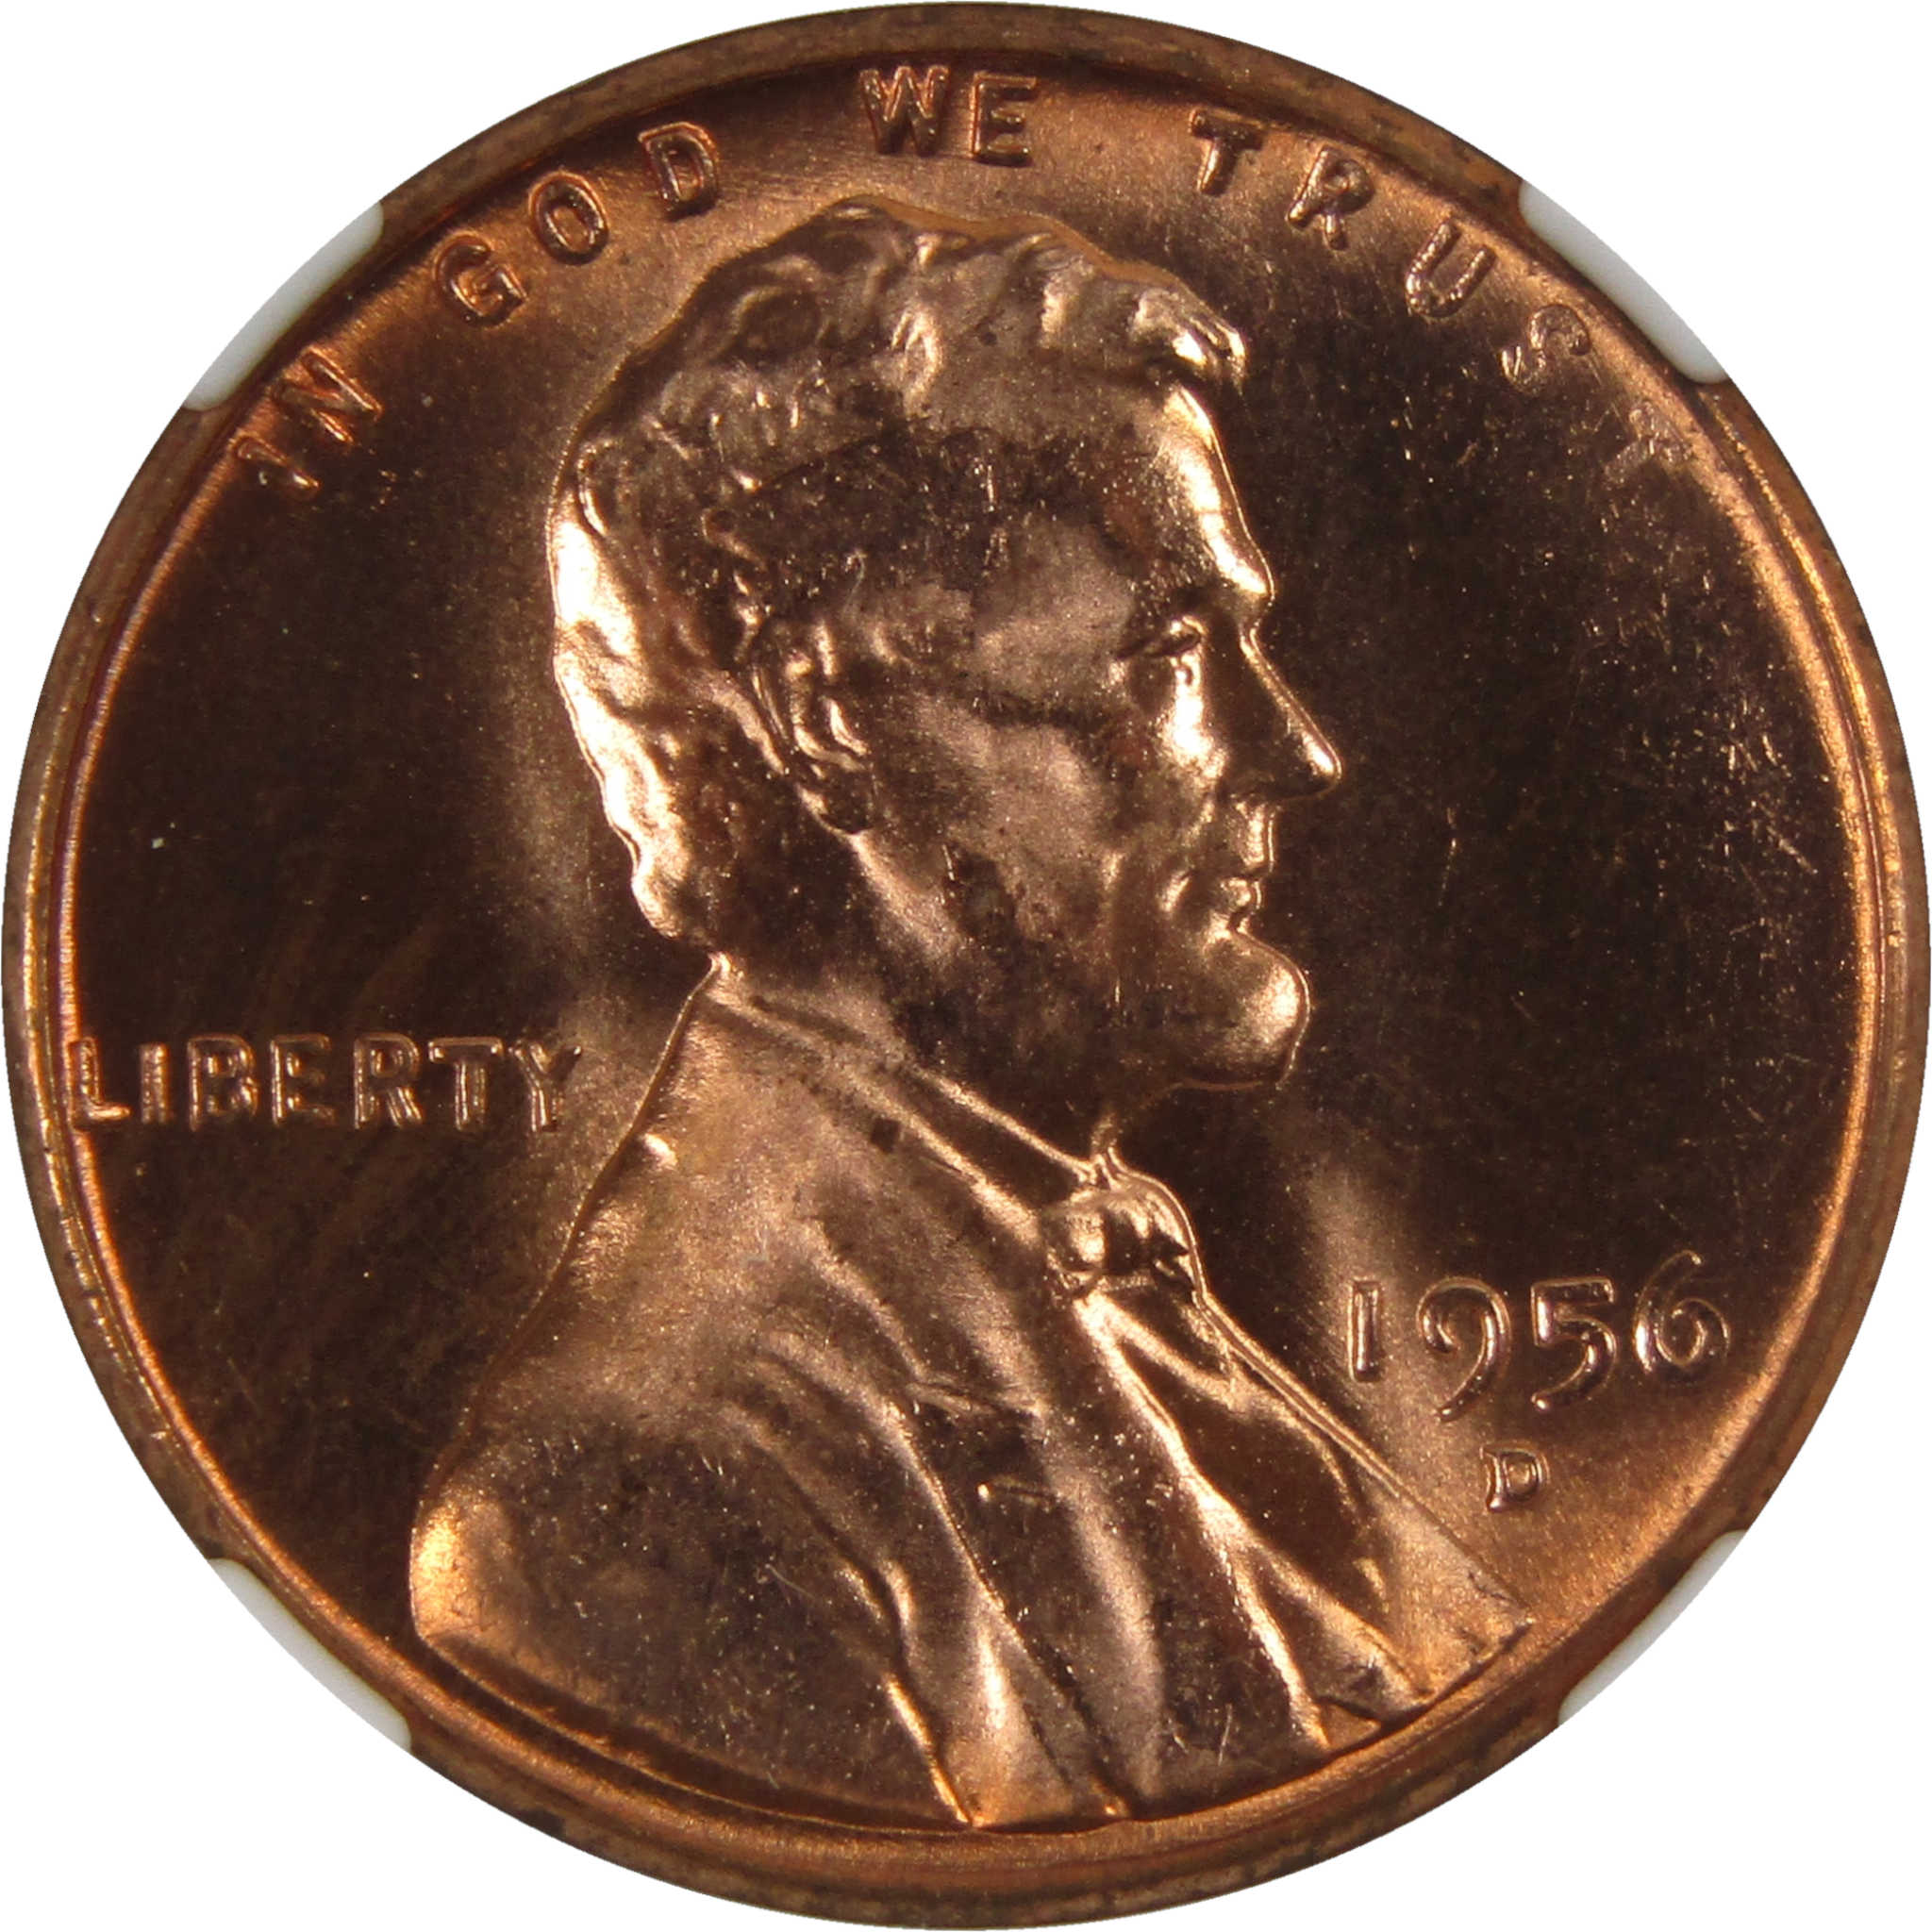 1956 D Lincoln Wheat Cent MS 66 RD NGC Penny Uncirculated SKU:I3661